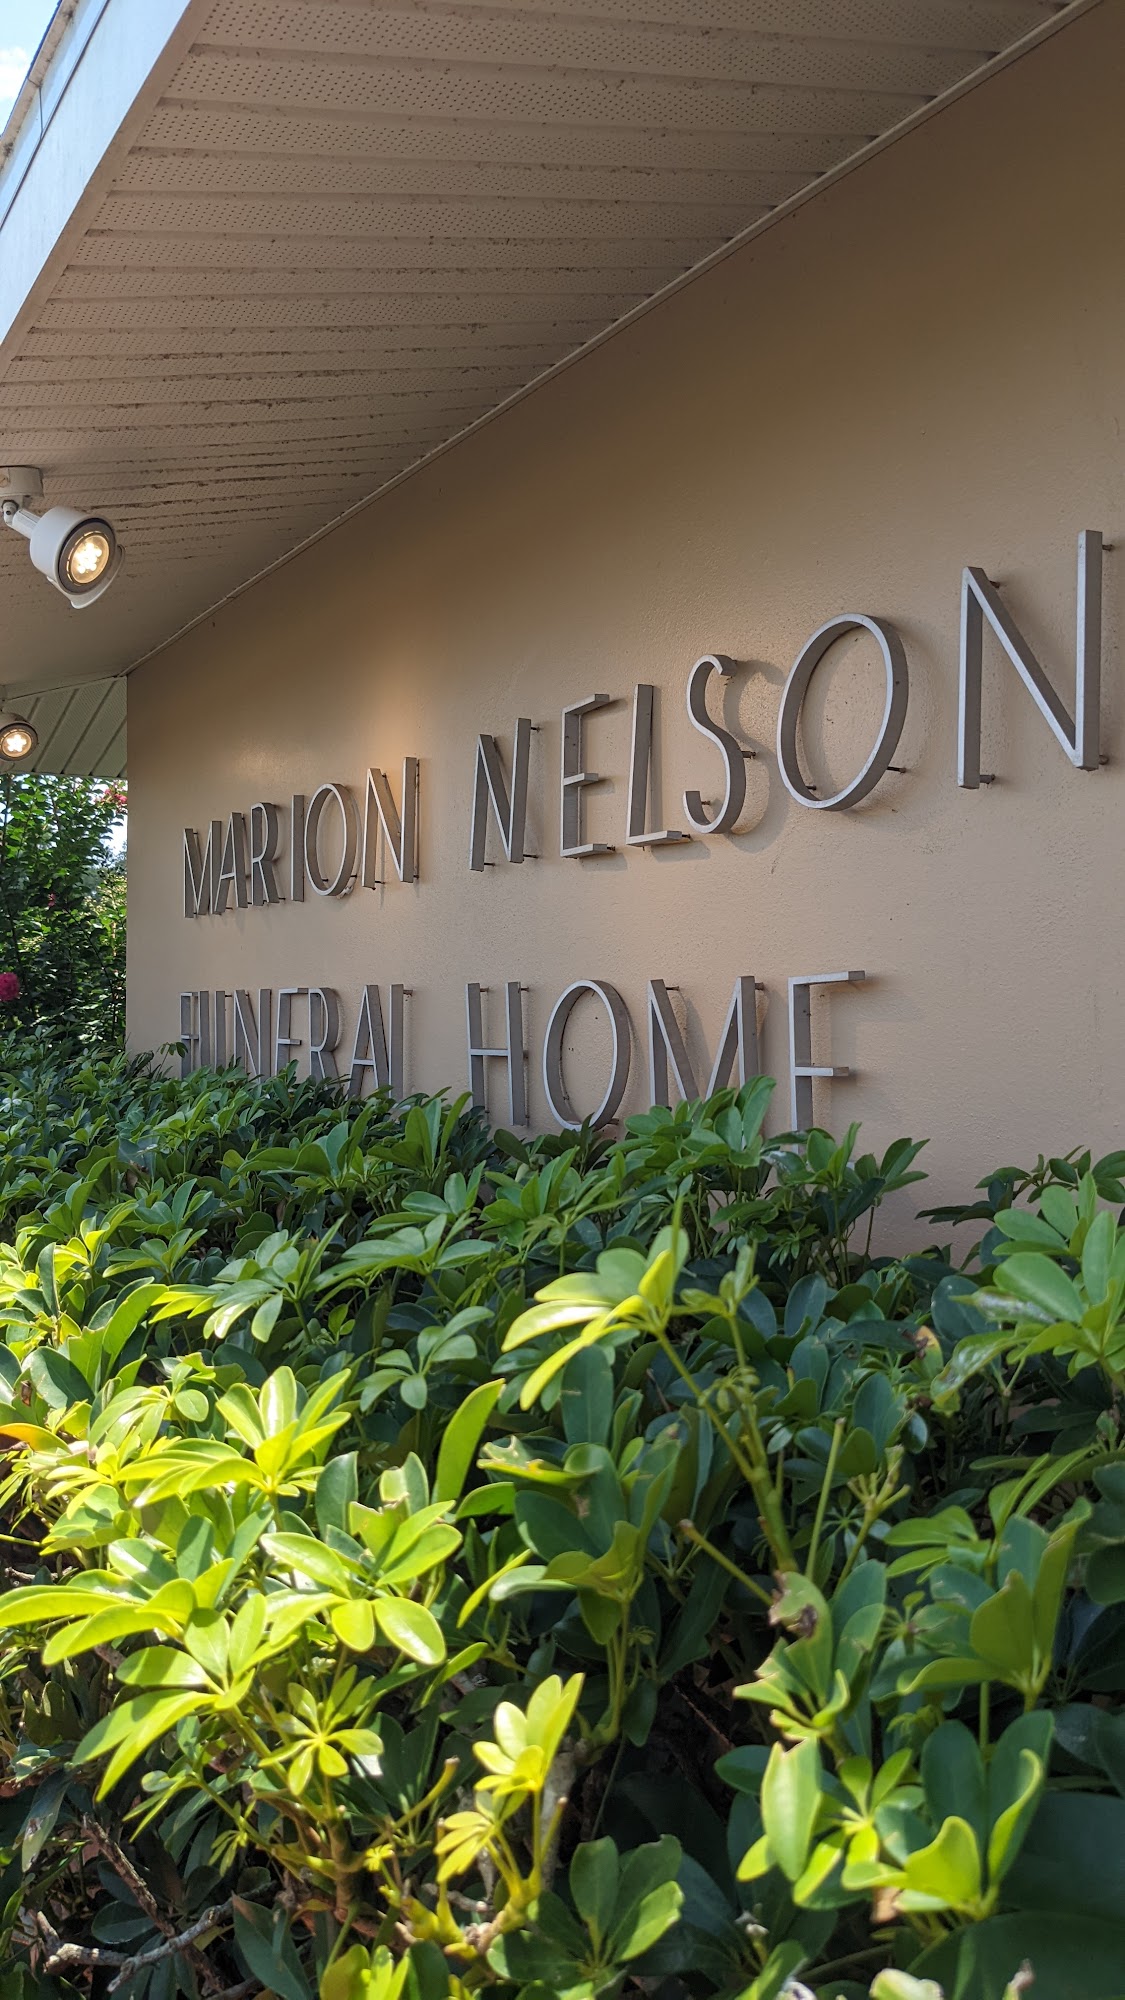 Marion Nelson Funeral Home 196 Co Rd 630, Frostproof Florida 33843